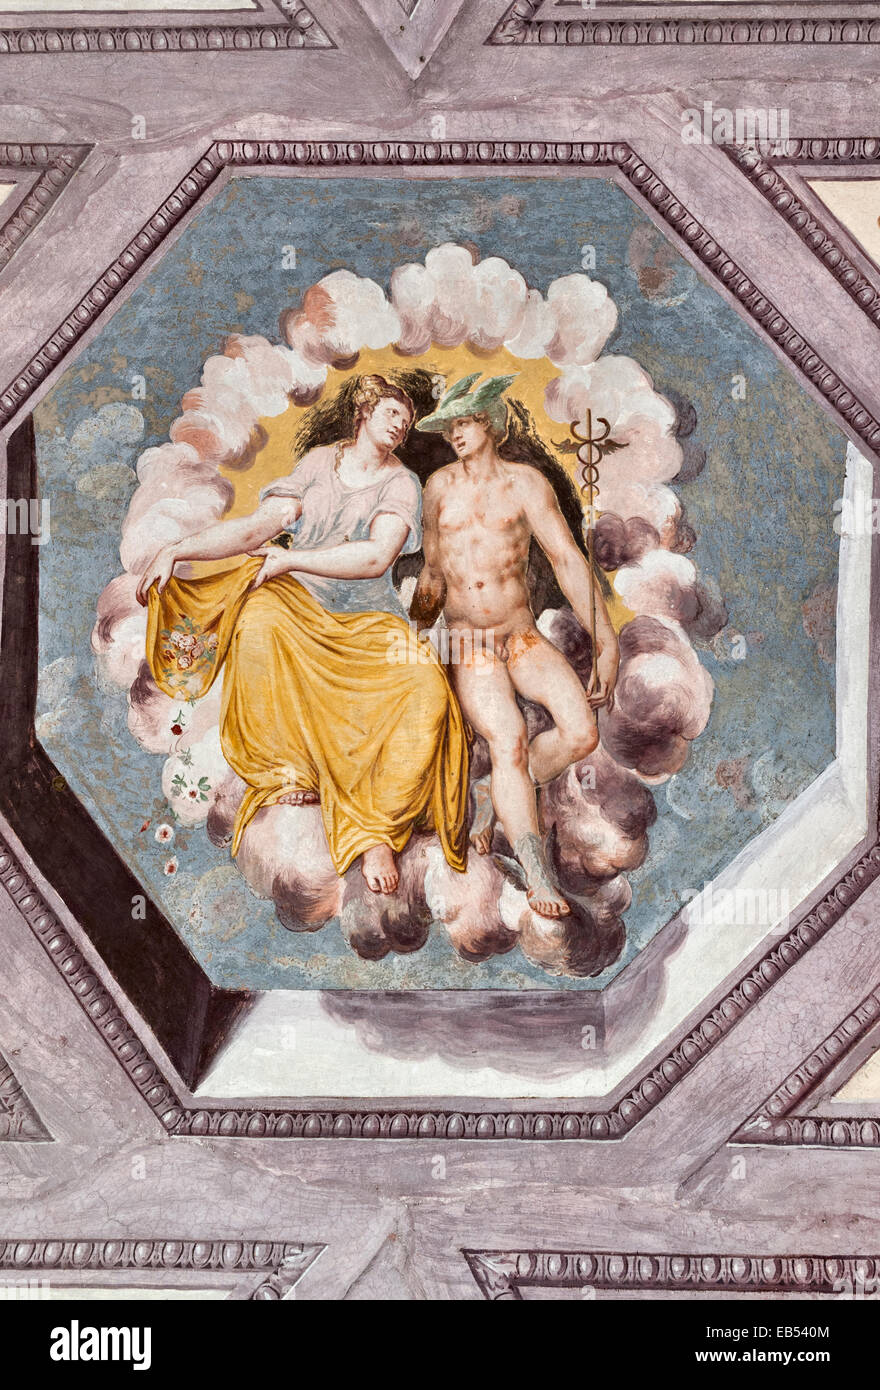 A frescoed ceiling showing the Roman deity Mercury (Hermes), god of luck and commerce, also the messenger, at Villa Godi Malinverni, Vicenza, Italy Stock Photo